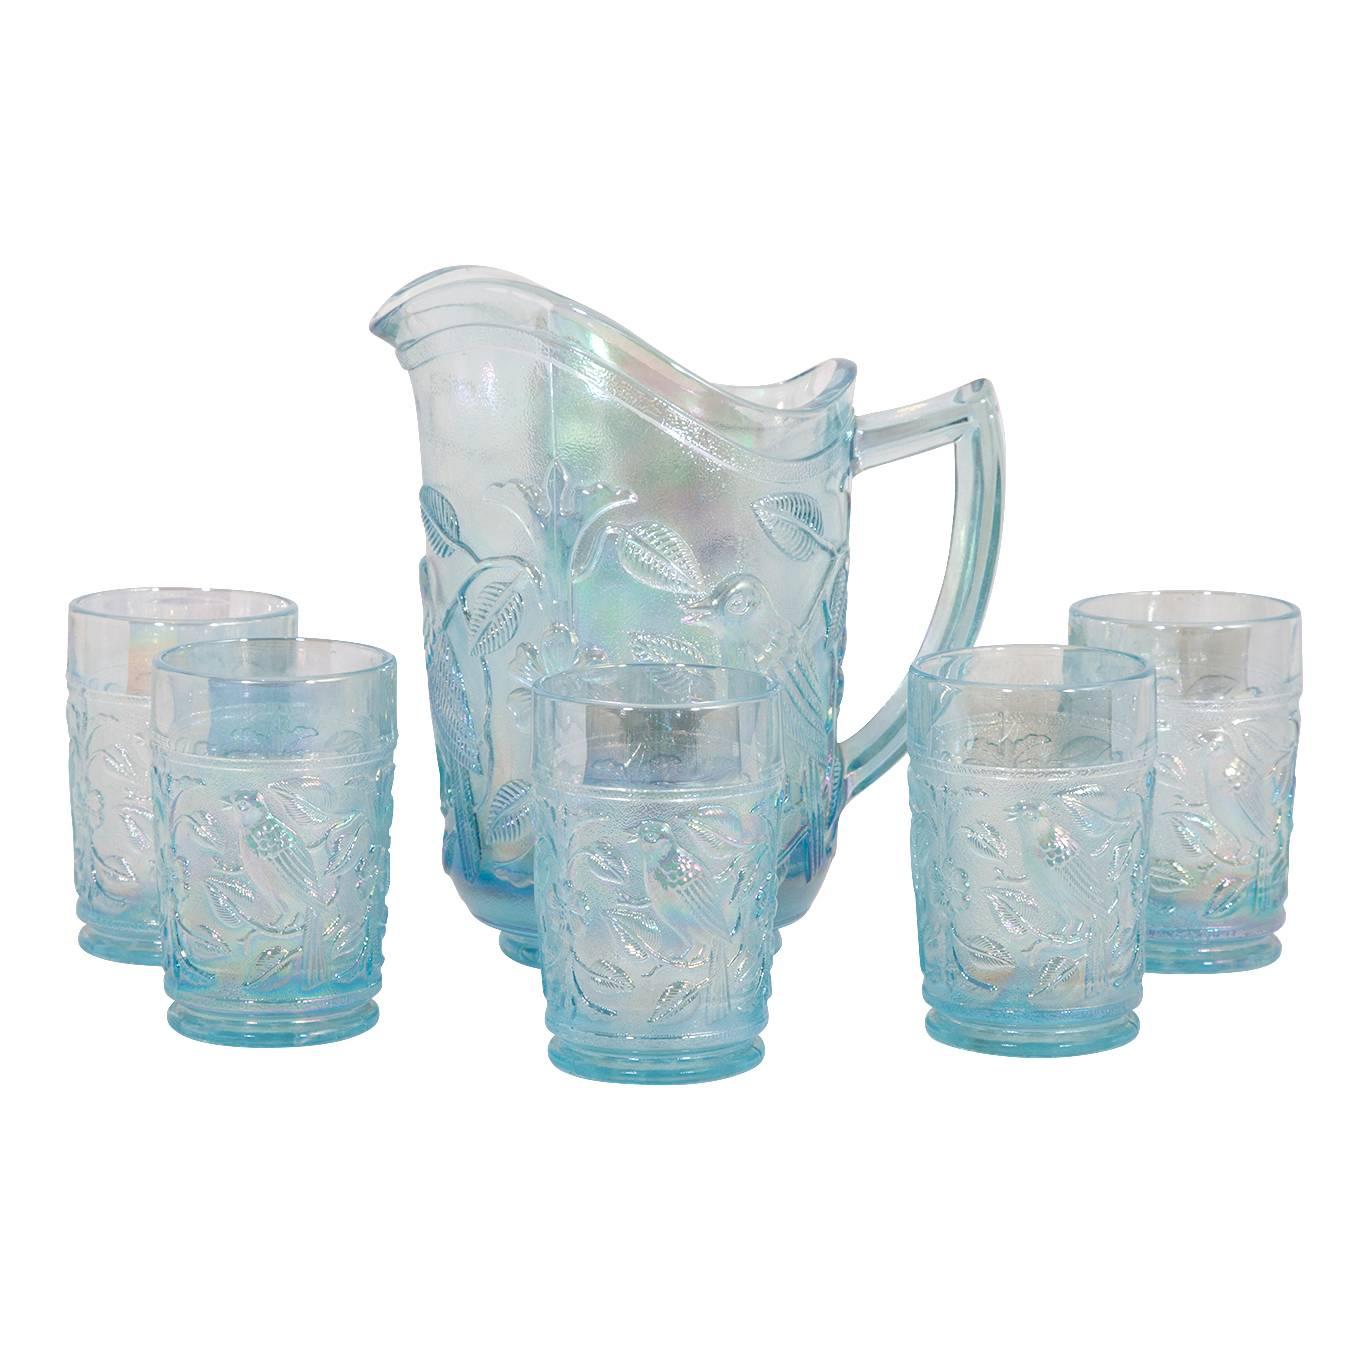 Iridescent Blue Pitcher and Glass Set For Sale